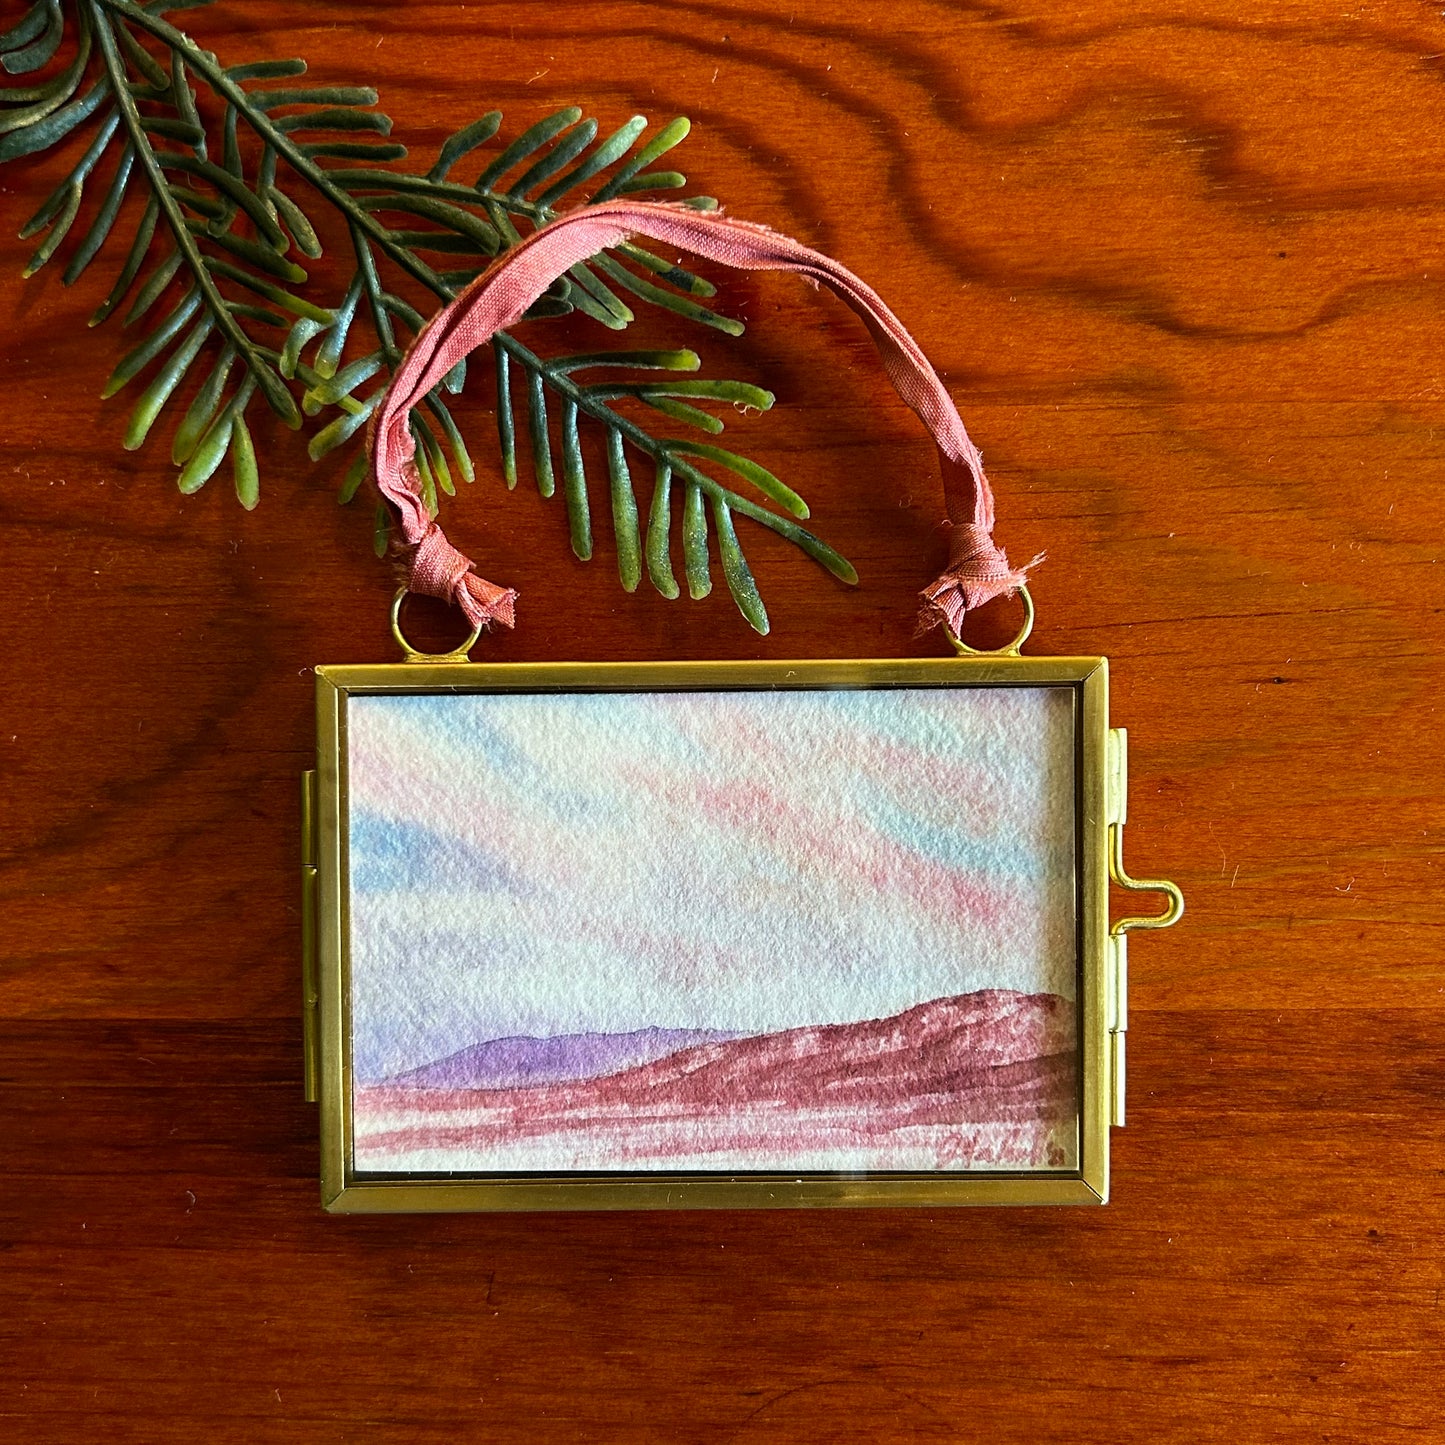 '23 Death Valley National Park Ornament